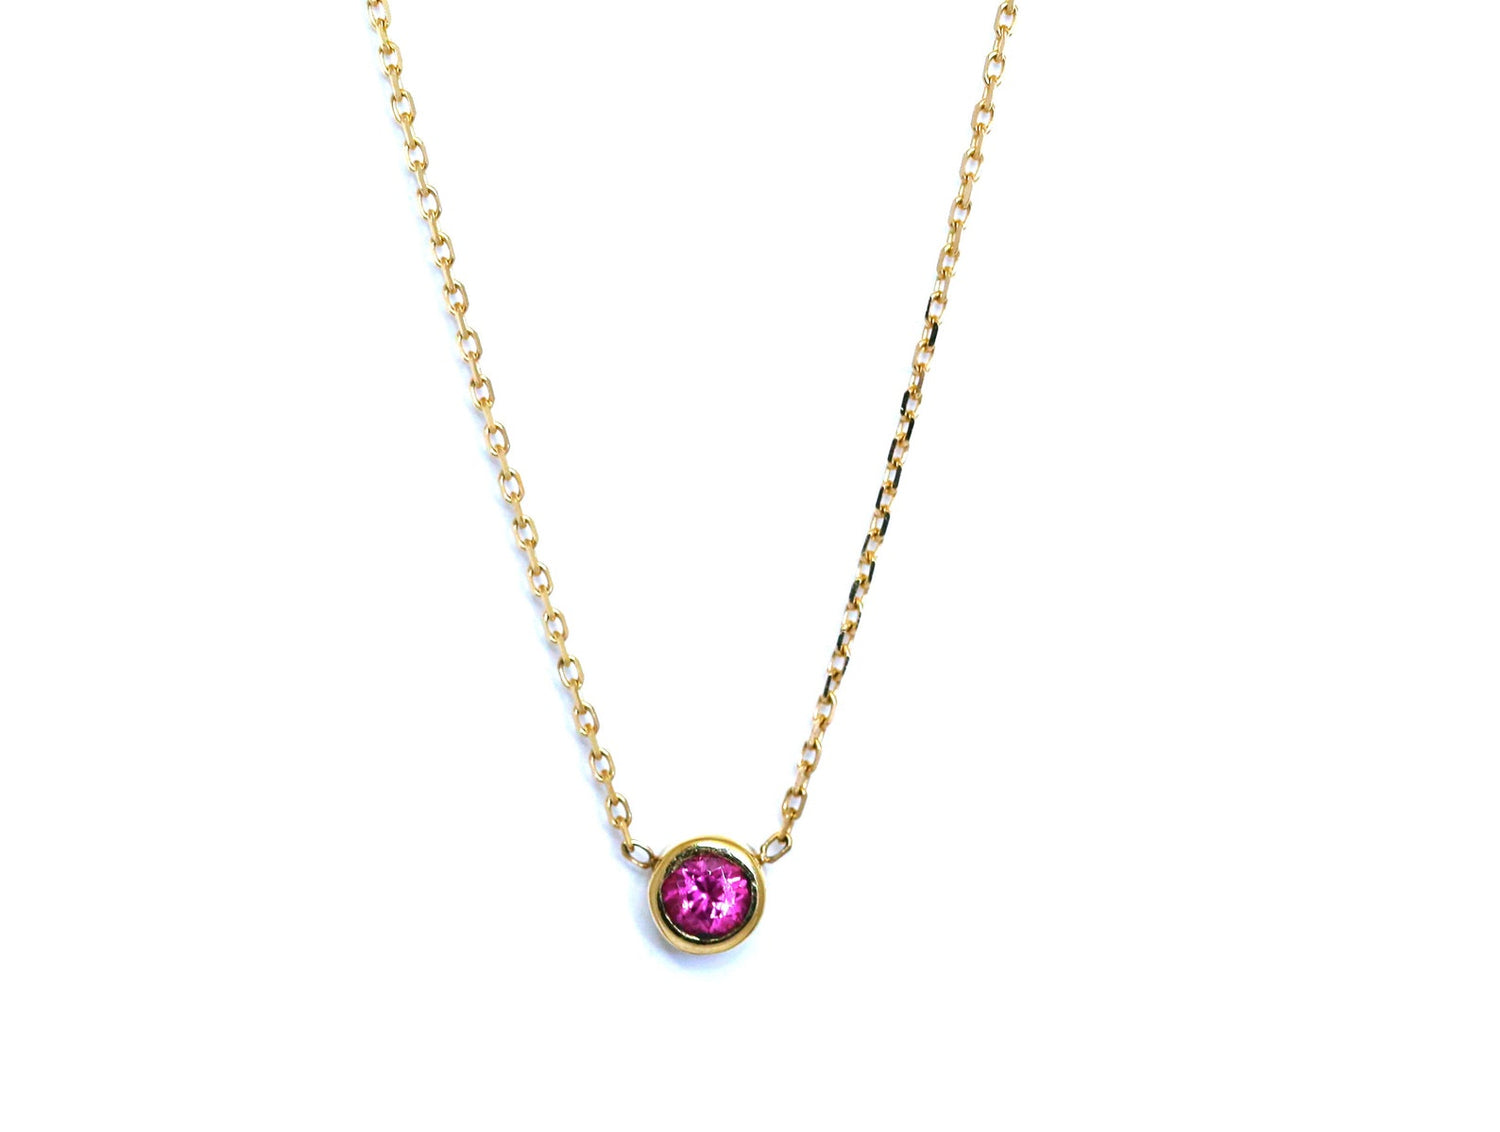 14K Gold Floating Pink Spinel Necklace | AVIE Fine Jewelry